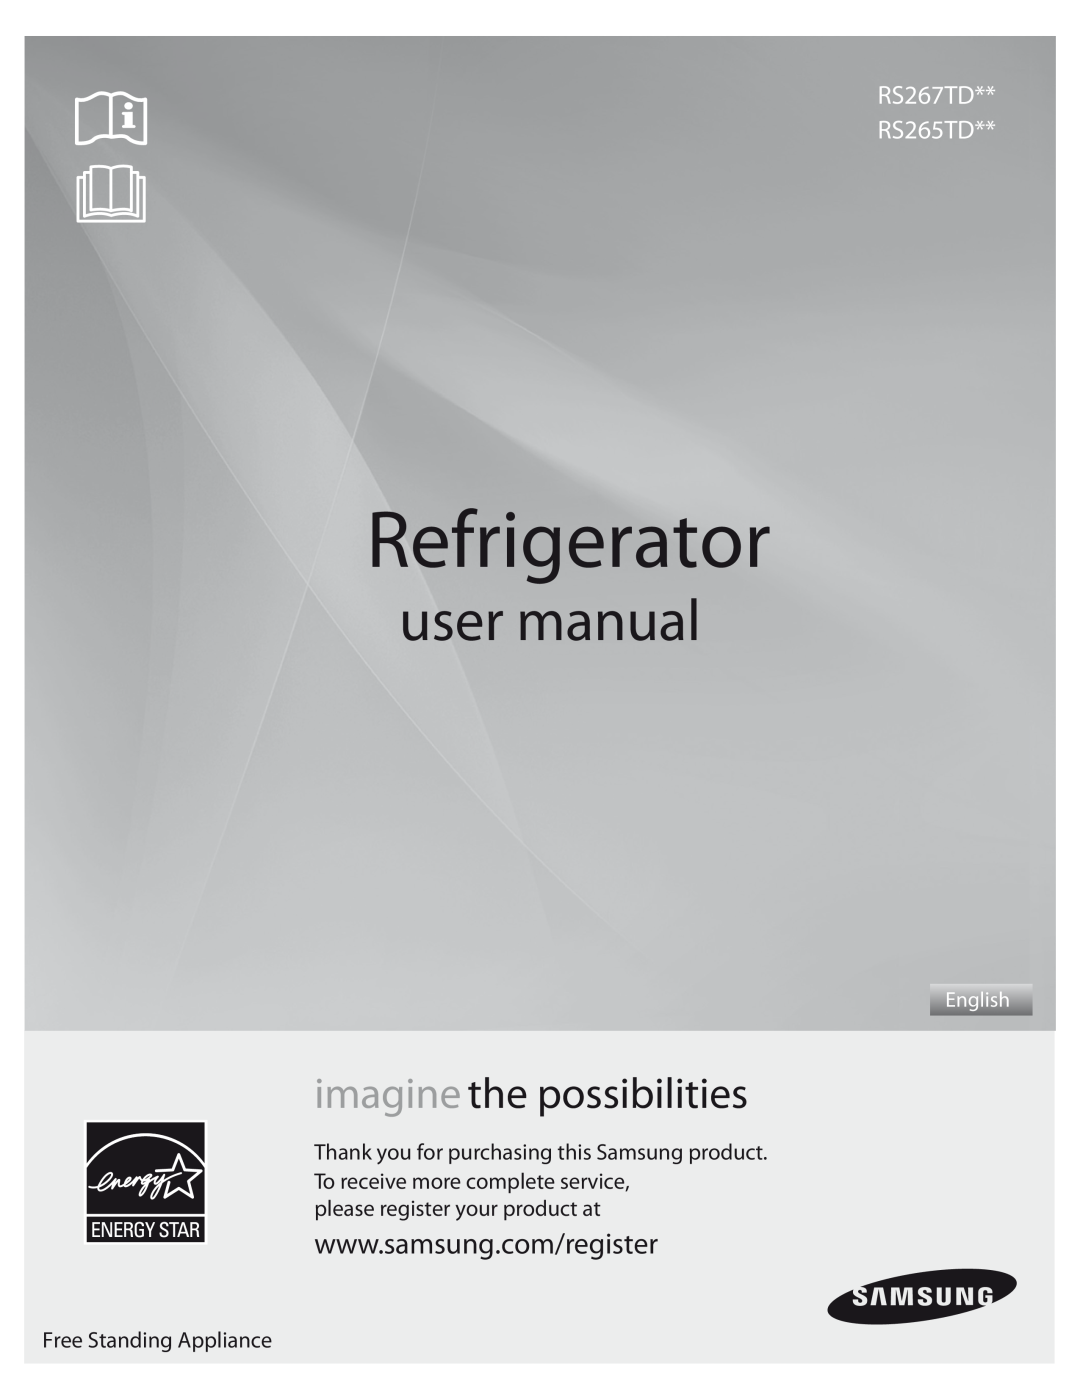 Samsung DA68-01890M user manual Refrigerator, imagine the possibilities, RS267TD RS265TD, please register your product at 